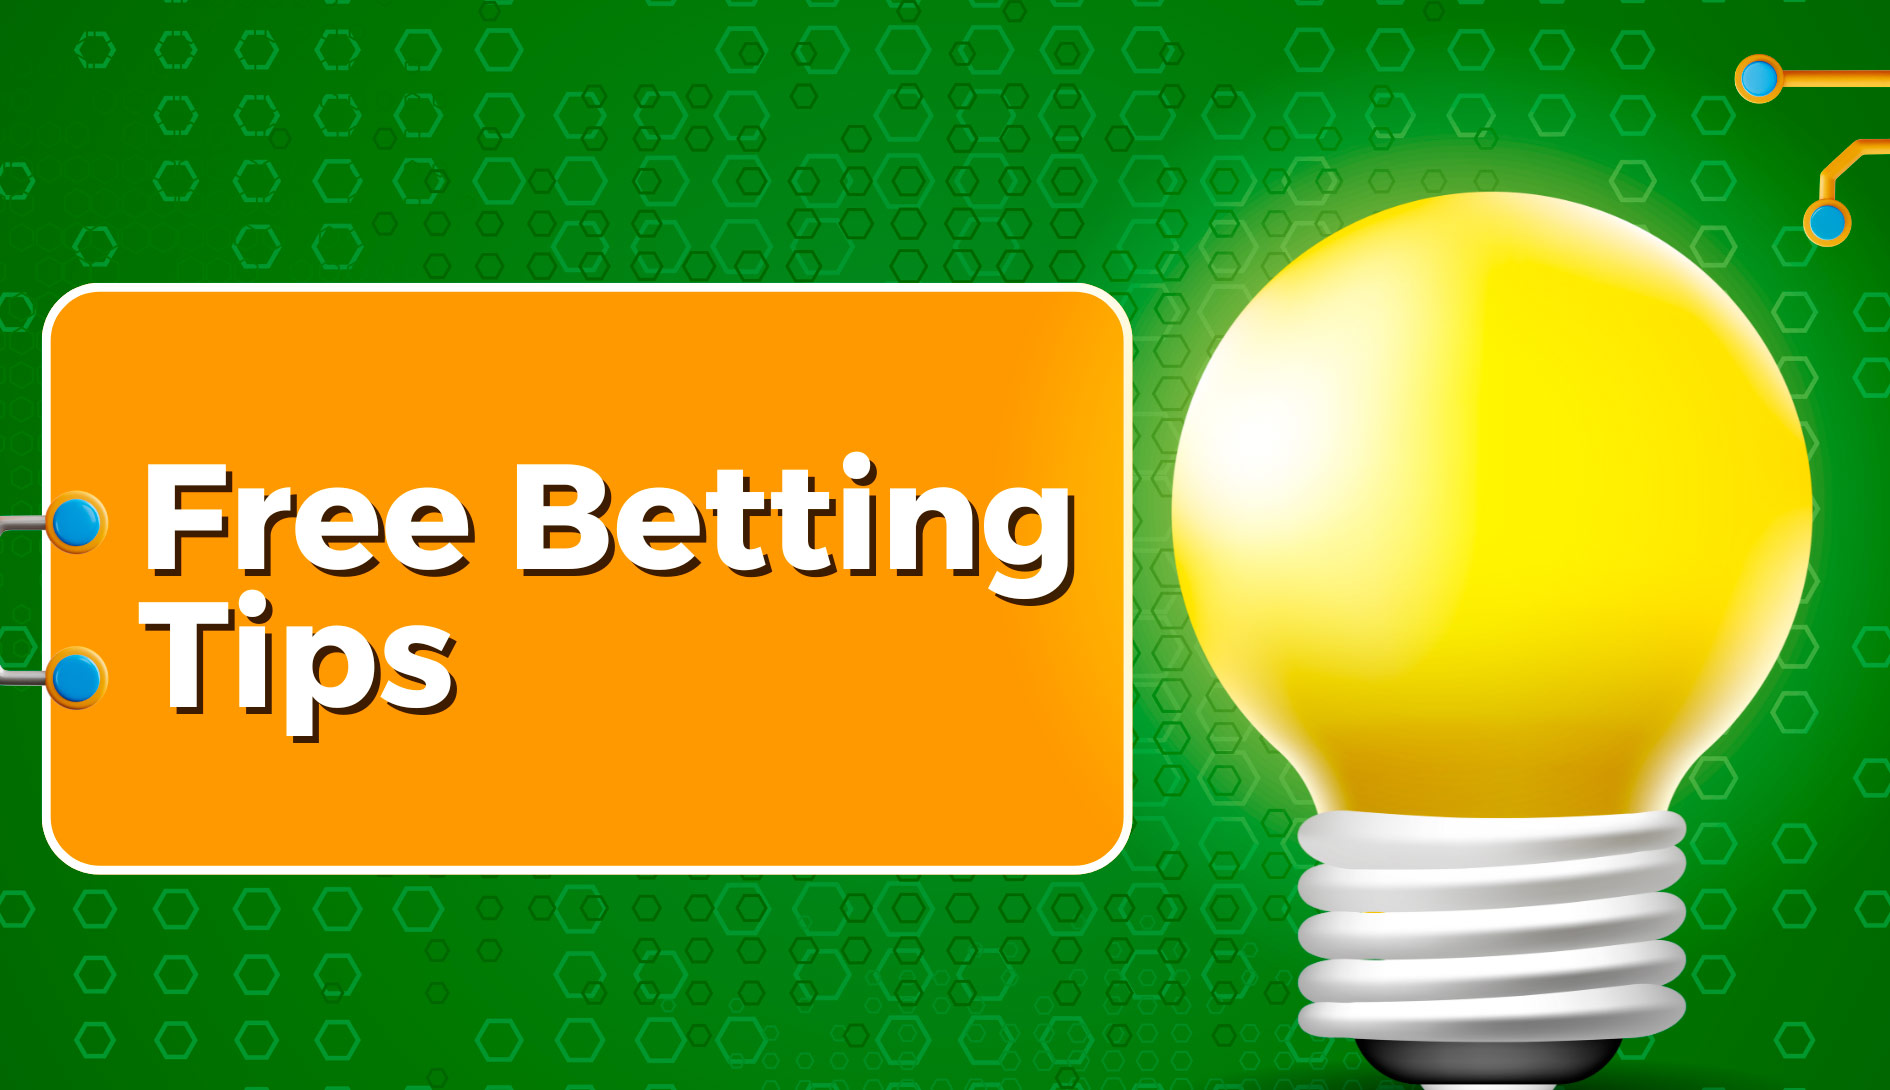 Explore the Journey of Free Betting Tips